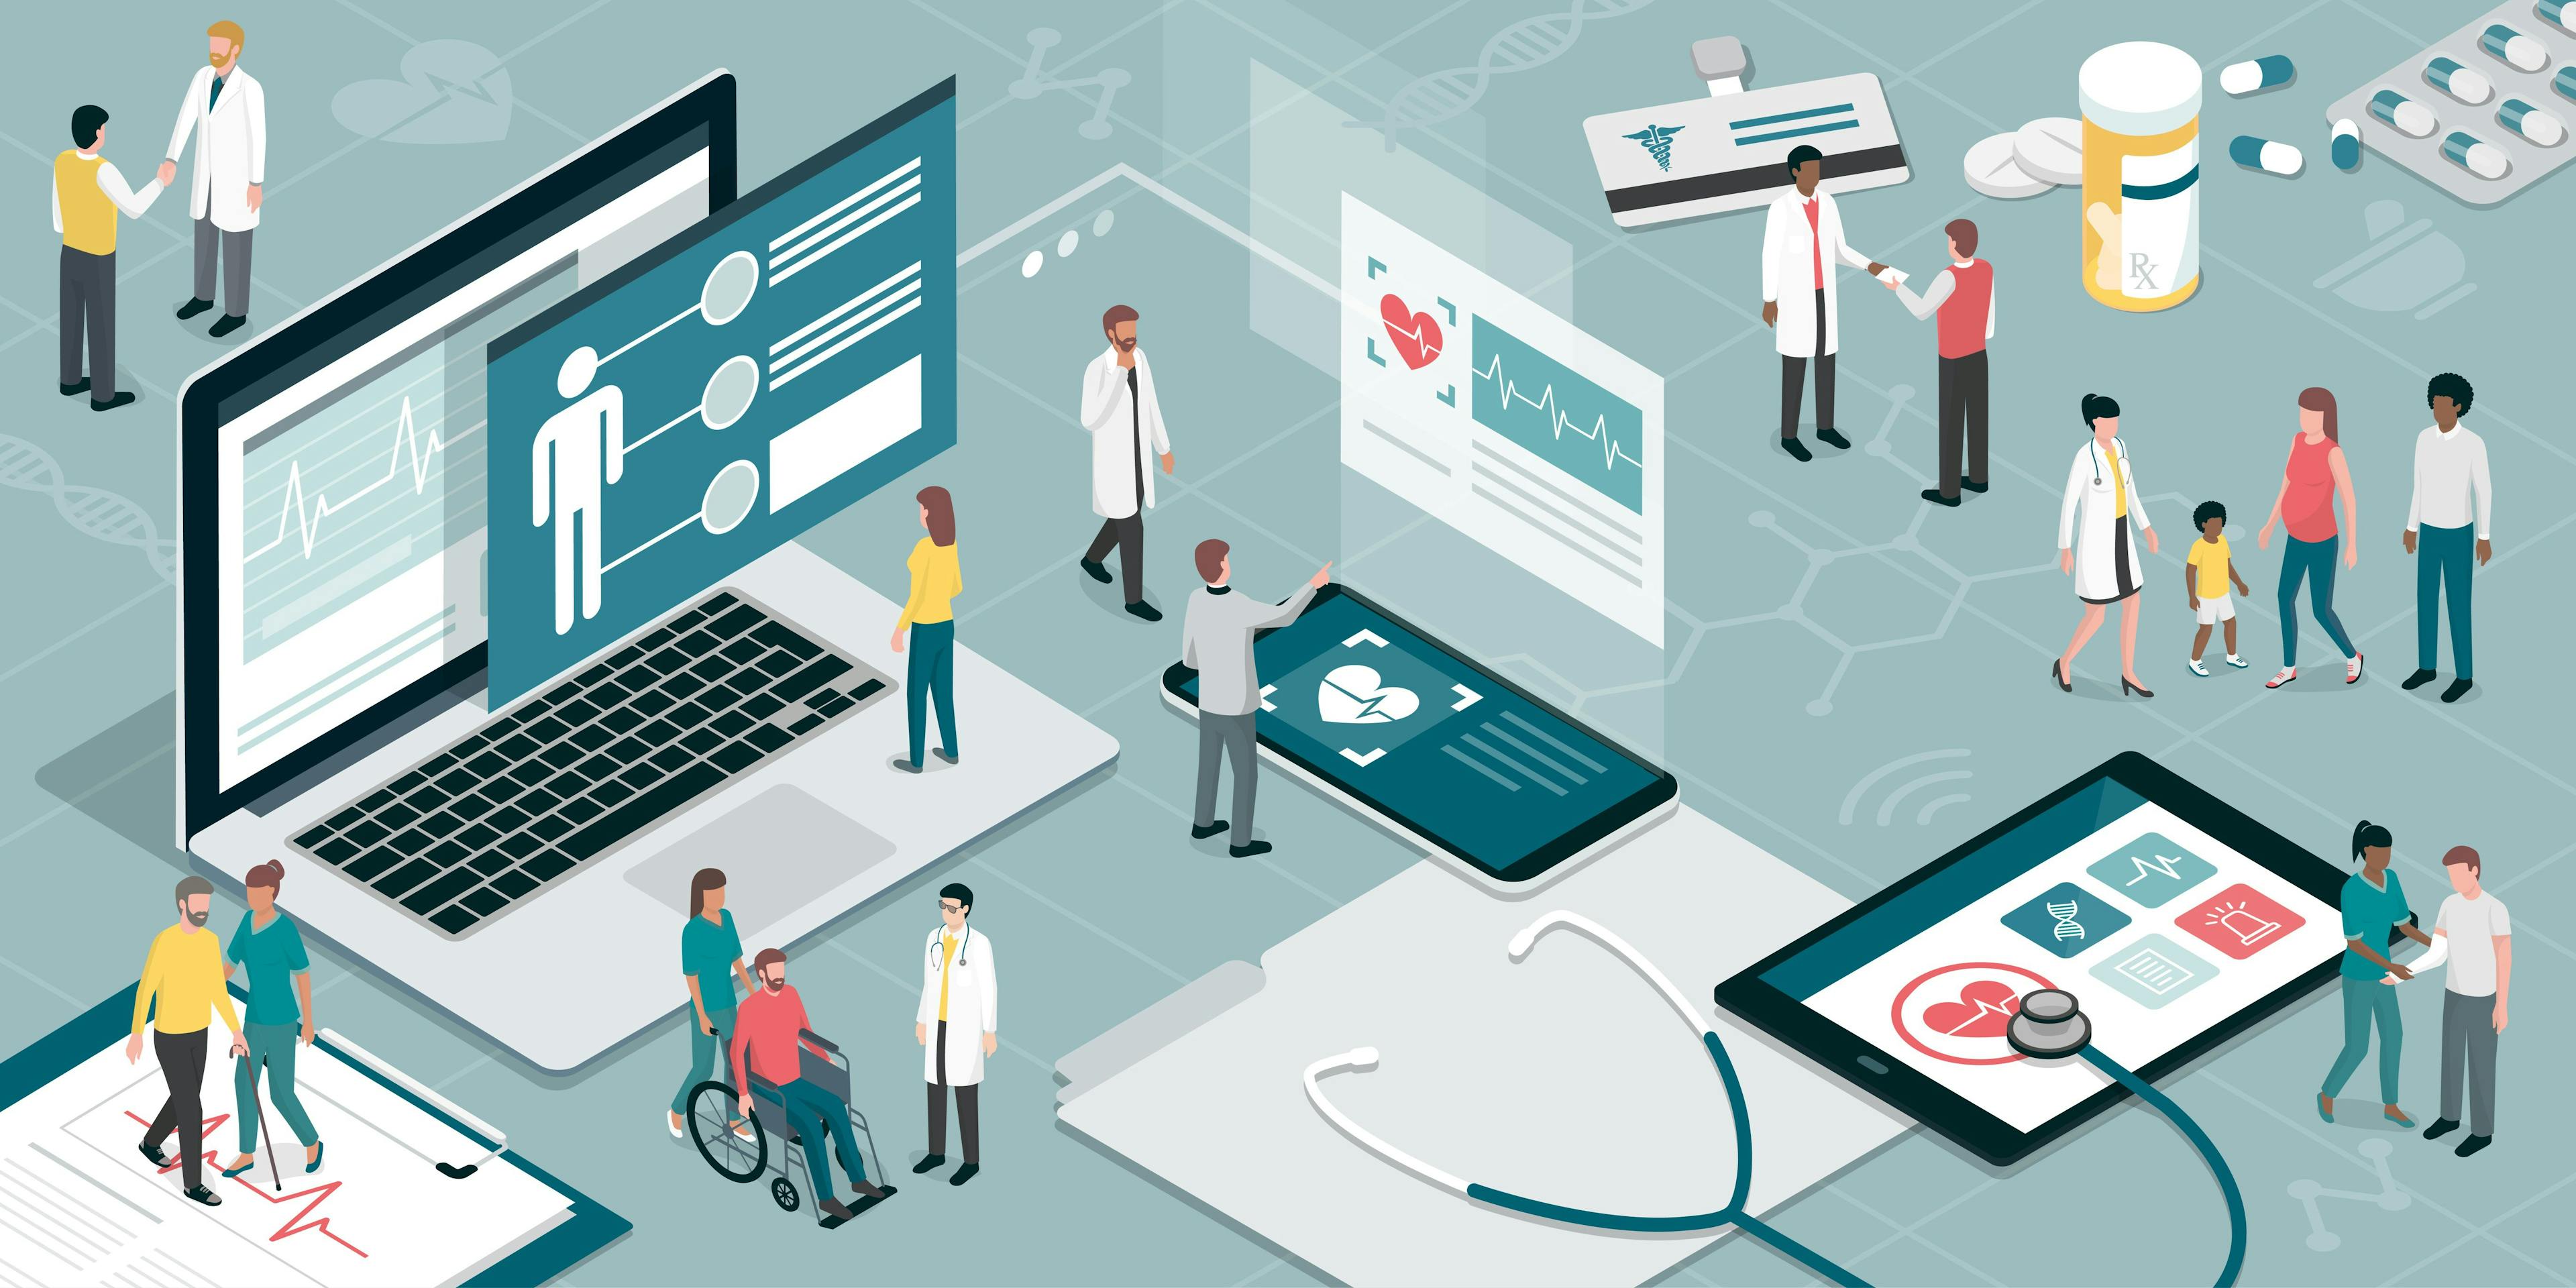 Healthcare and technology | Image Credit: © elenabsl - stock.adobe.com